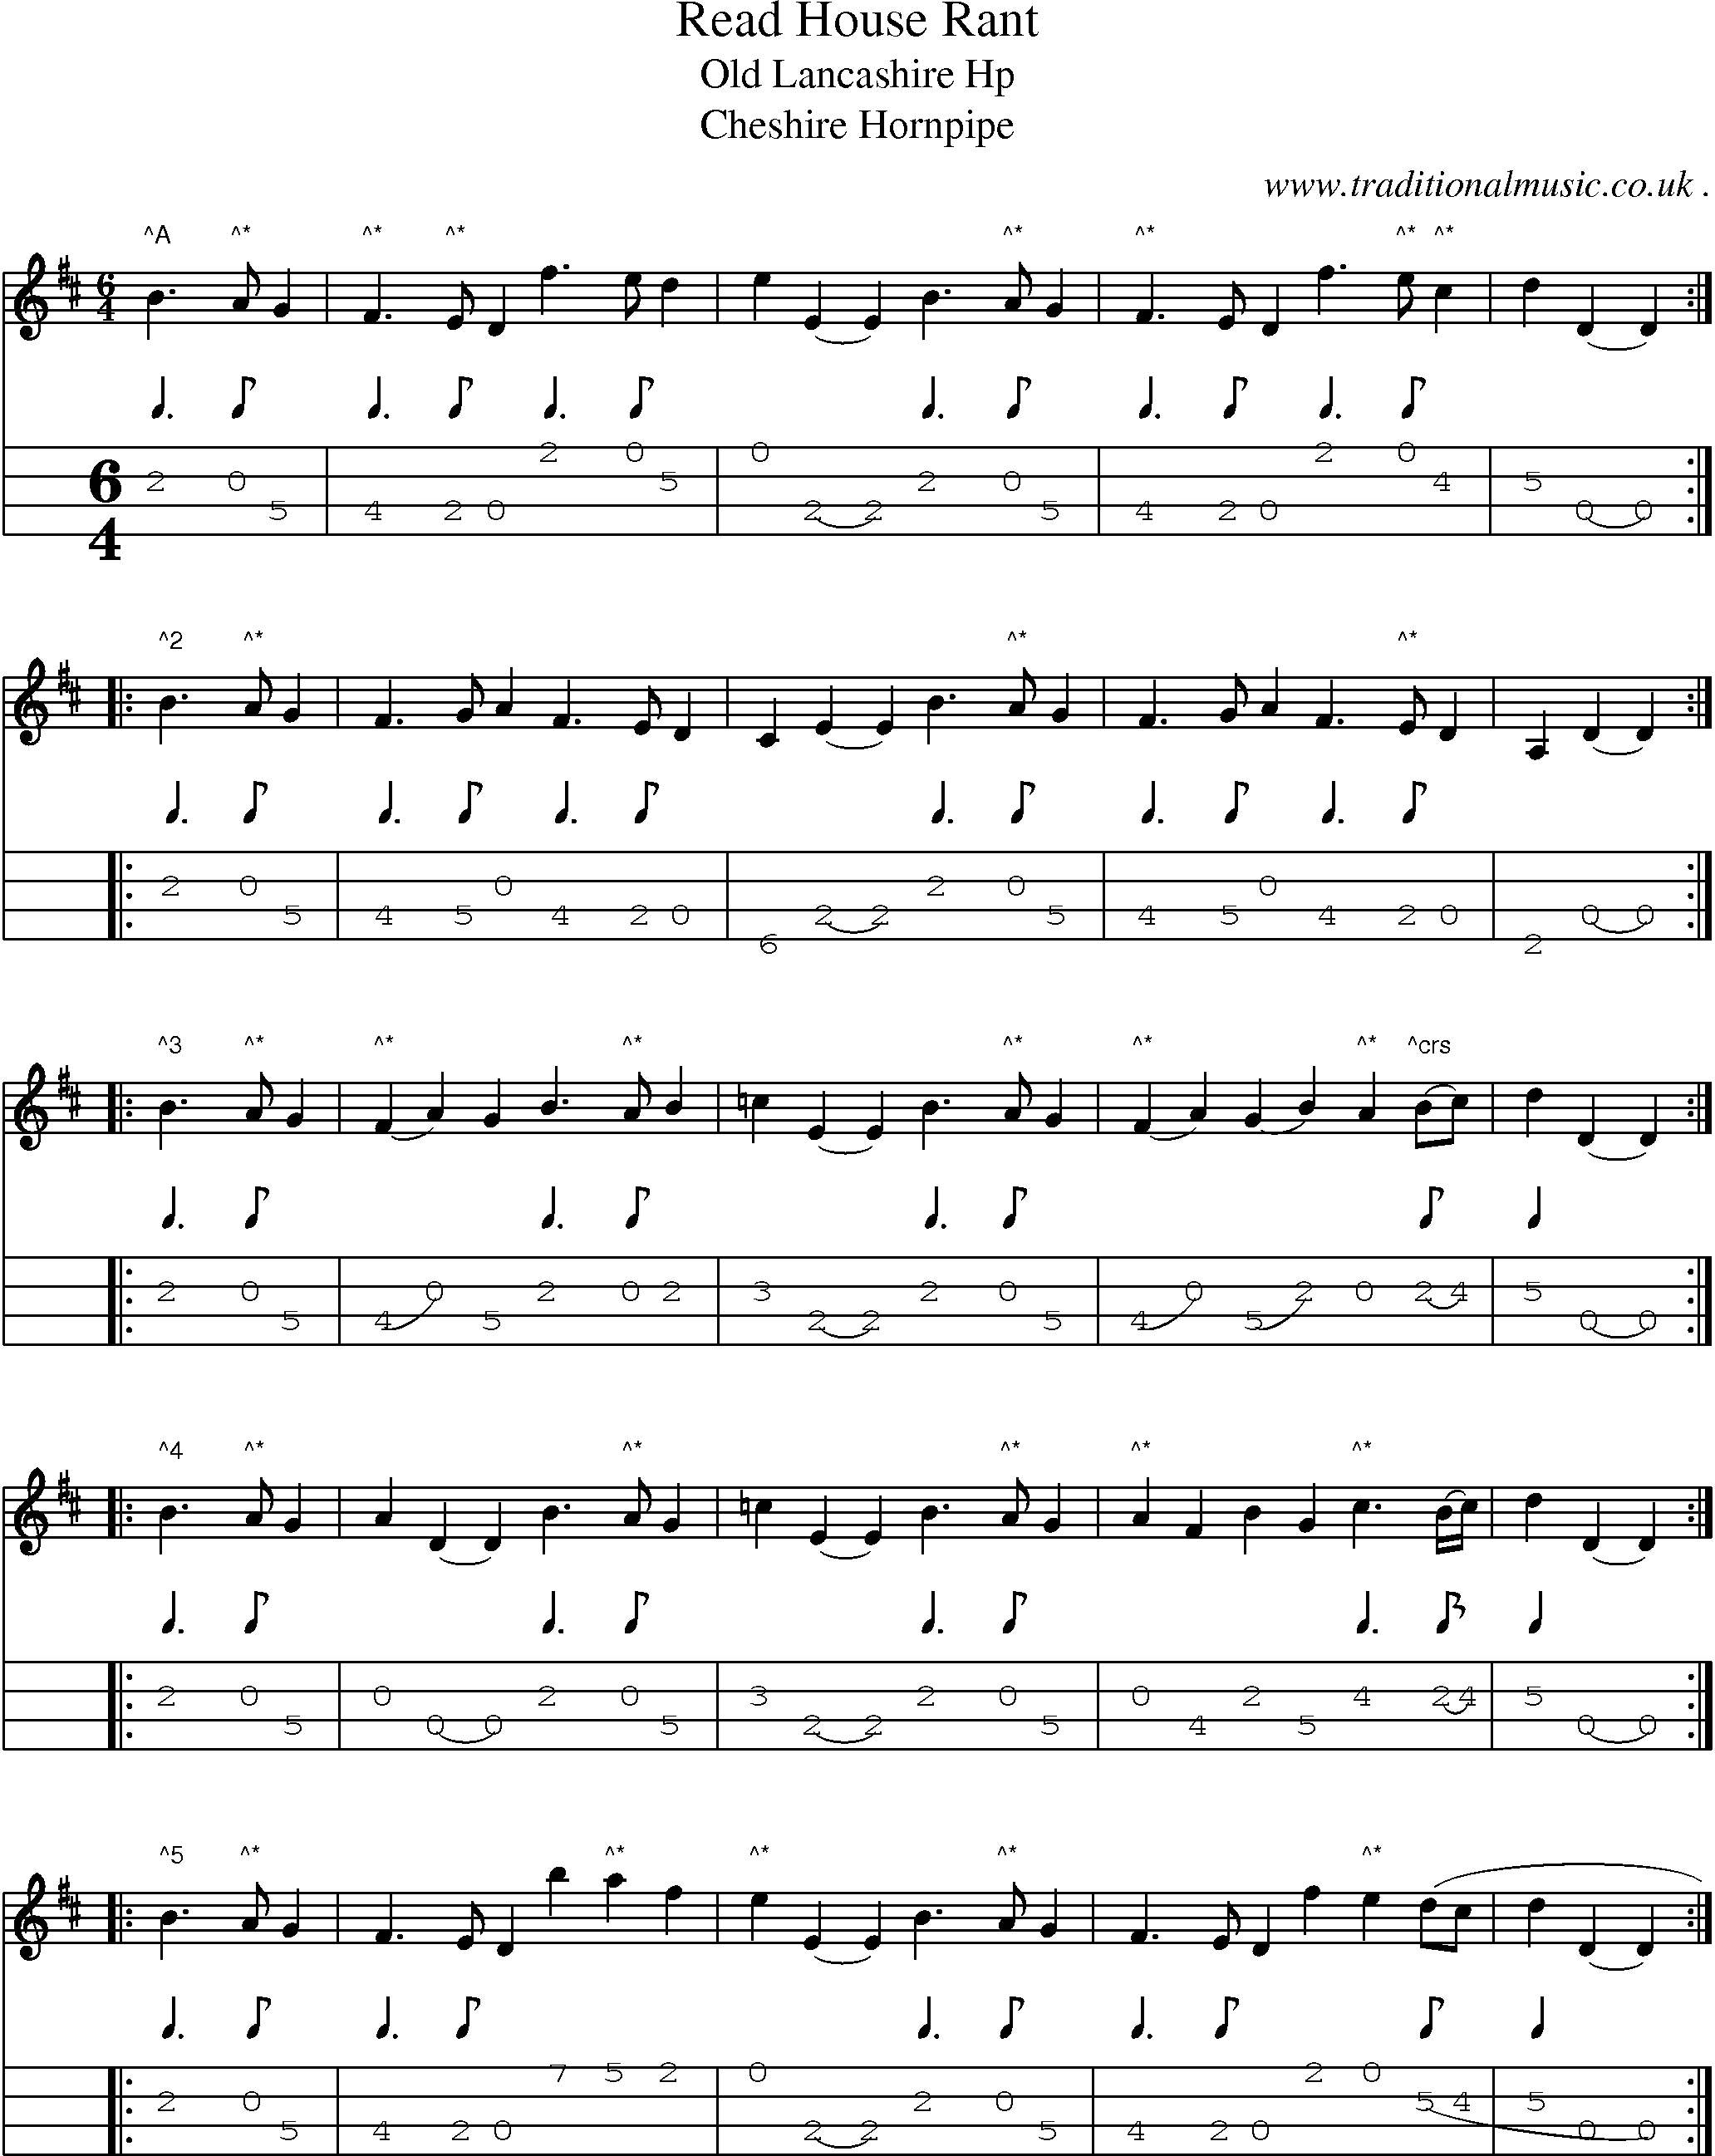 Sheet-Music and Mandolin Tabs for Read House Rant